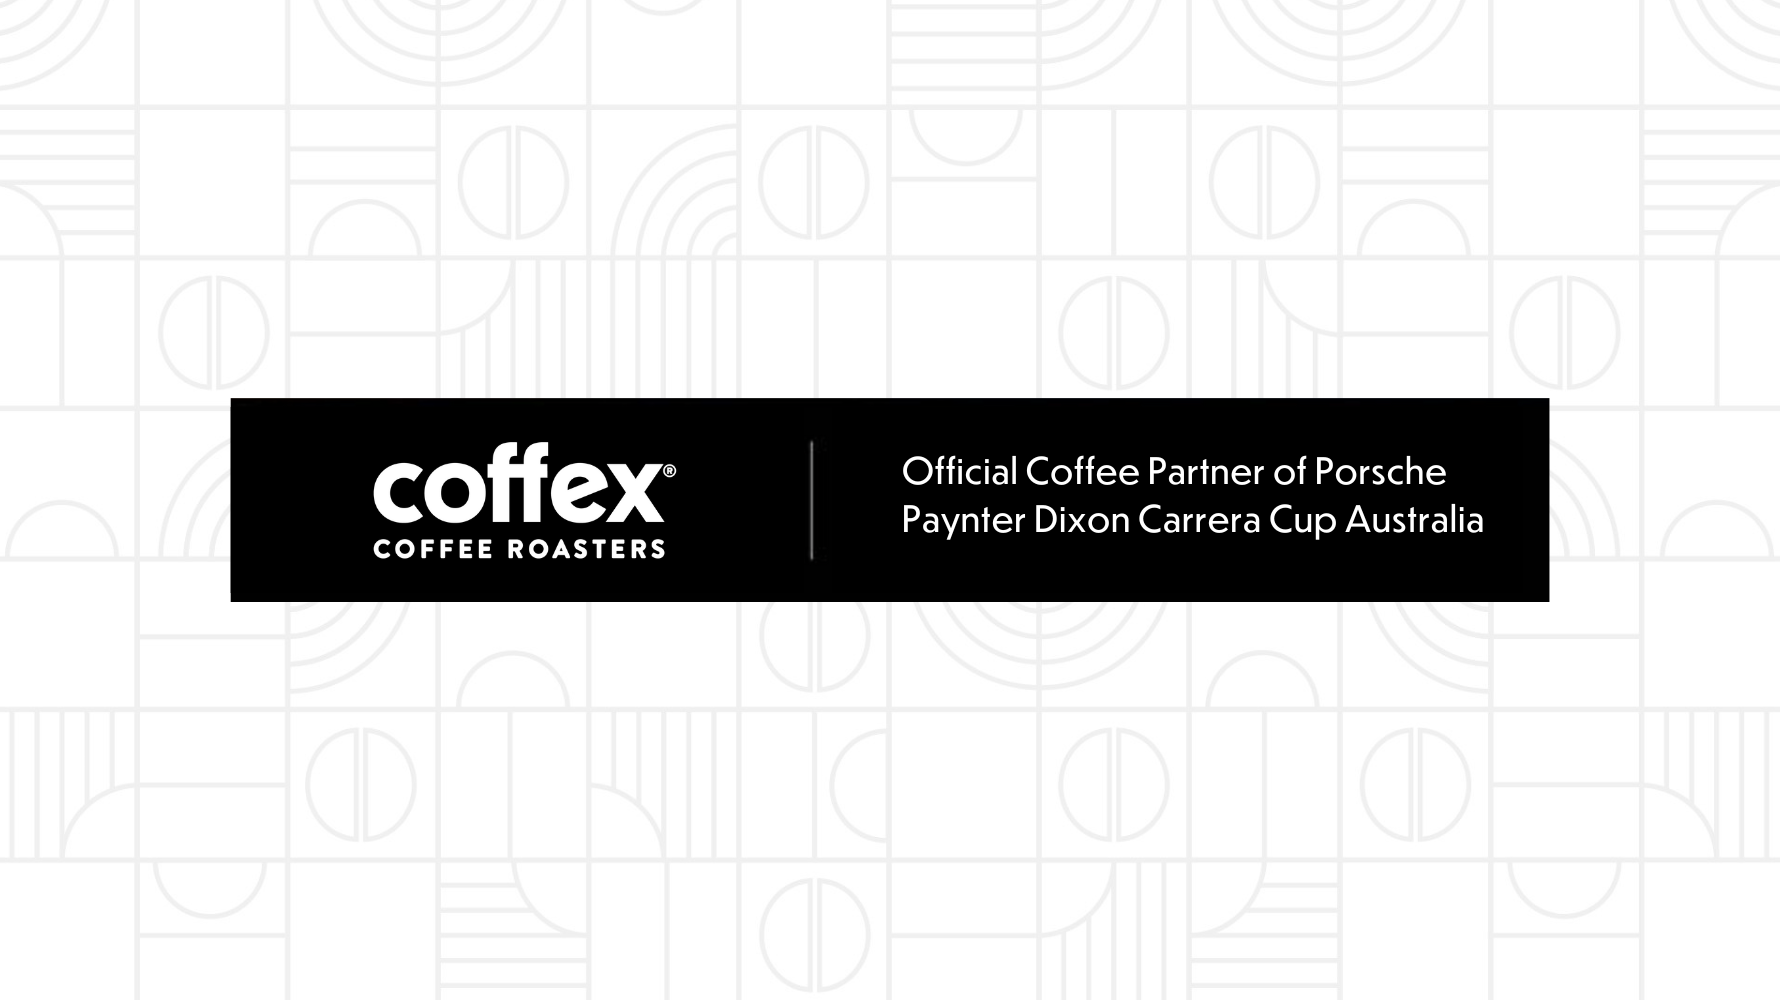 Coffex is revving it up in 2024 as Official Coffee Partner of Porsche Paynter Dixon Carrera Cup Australia